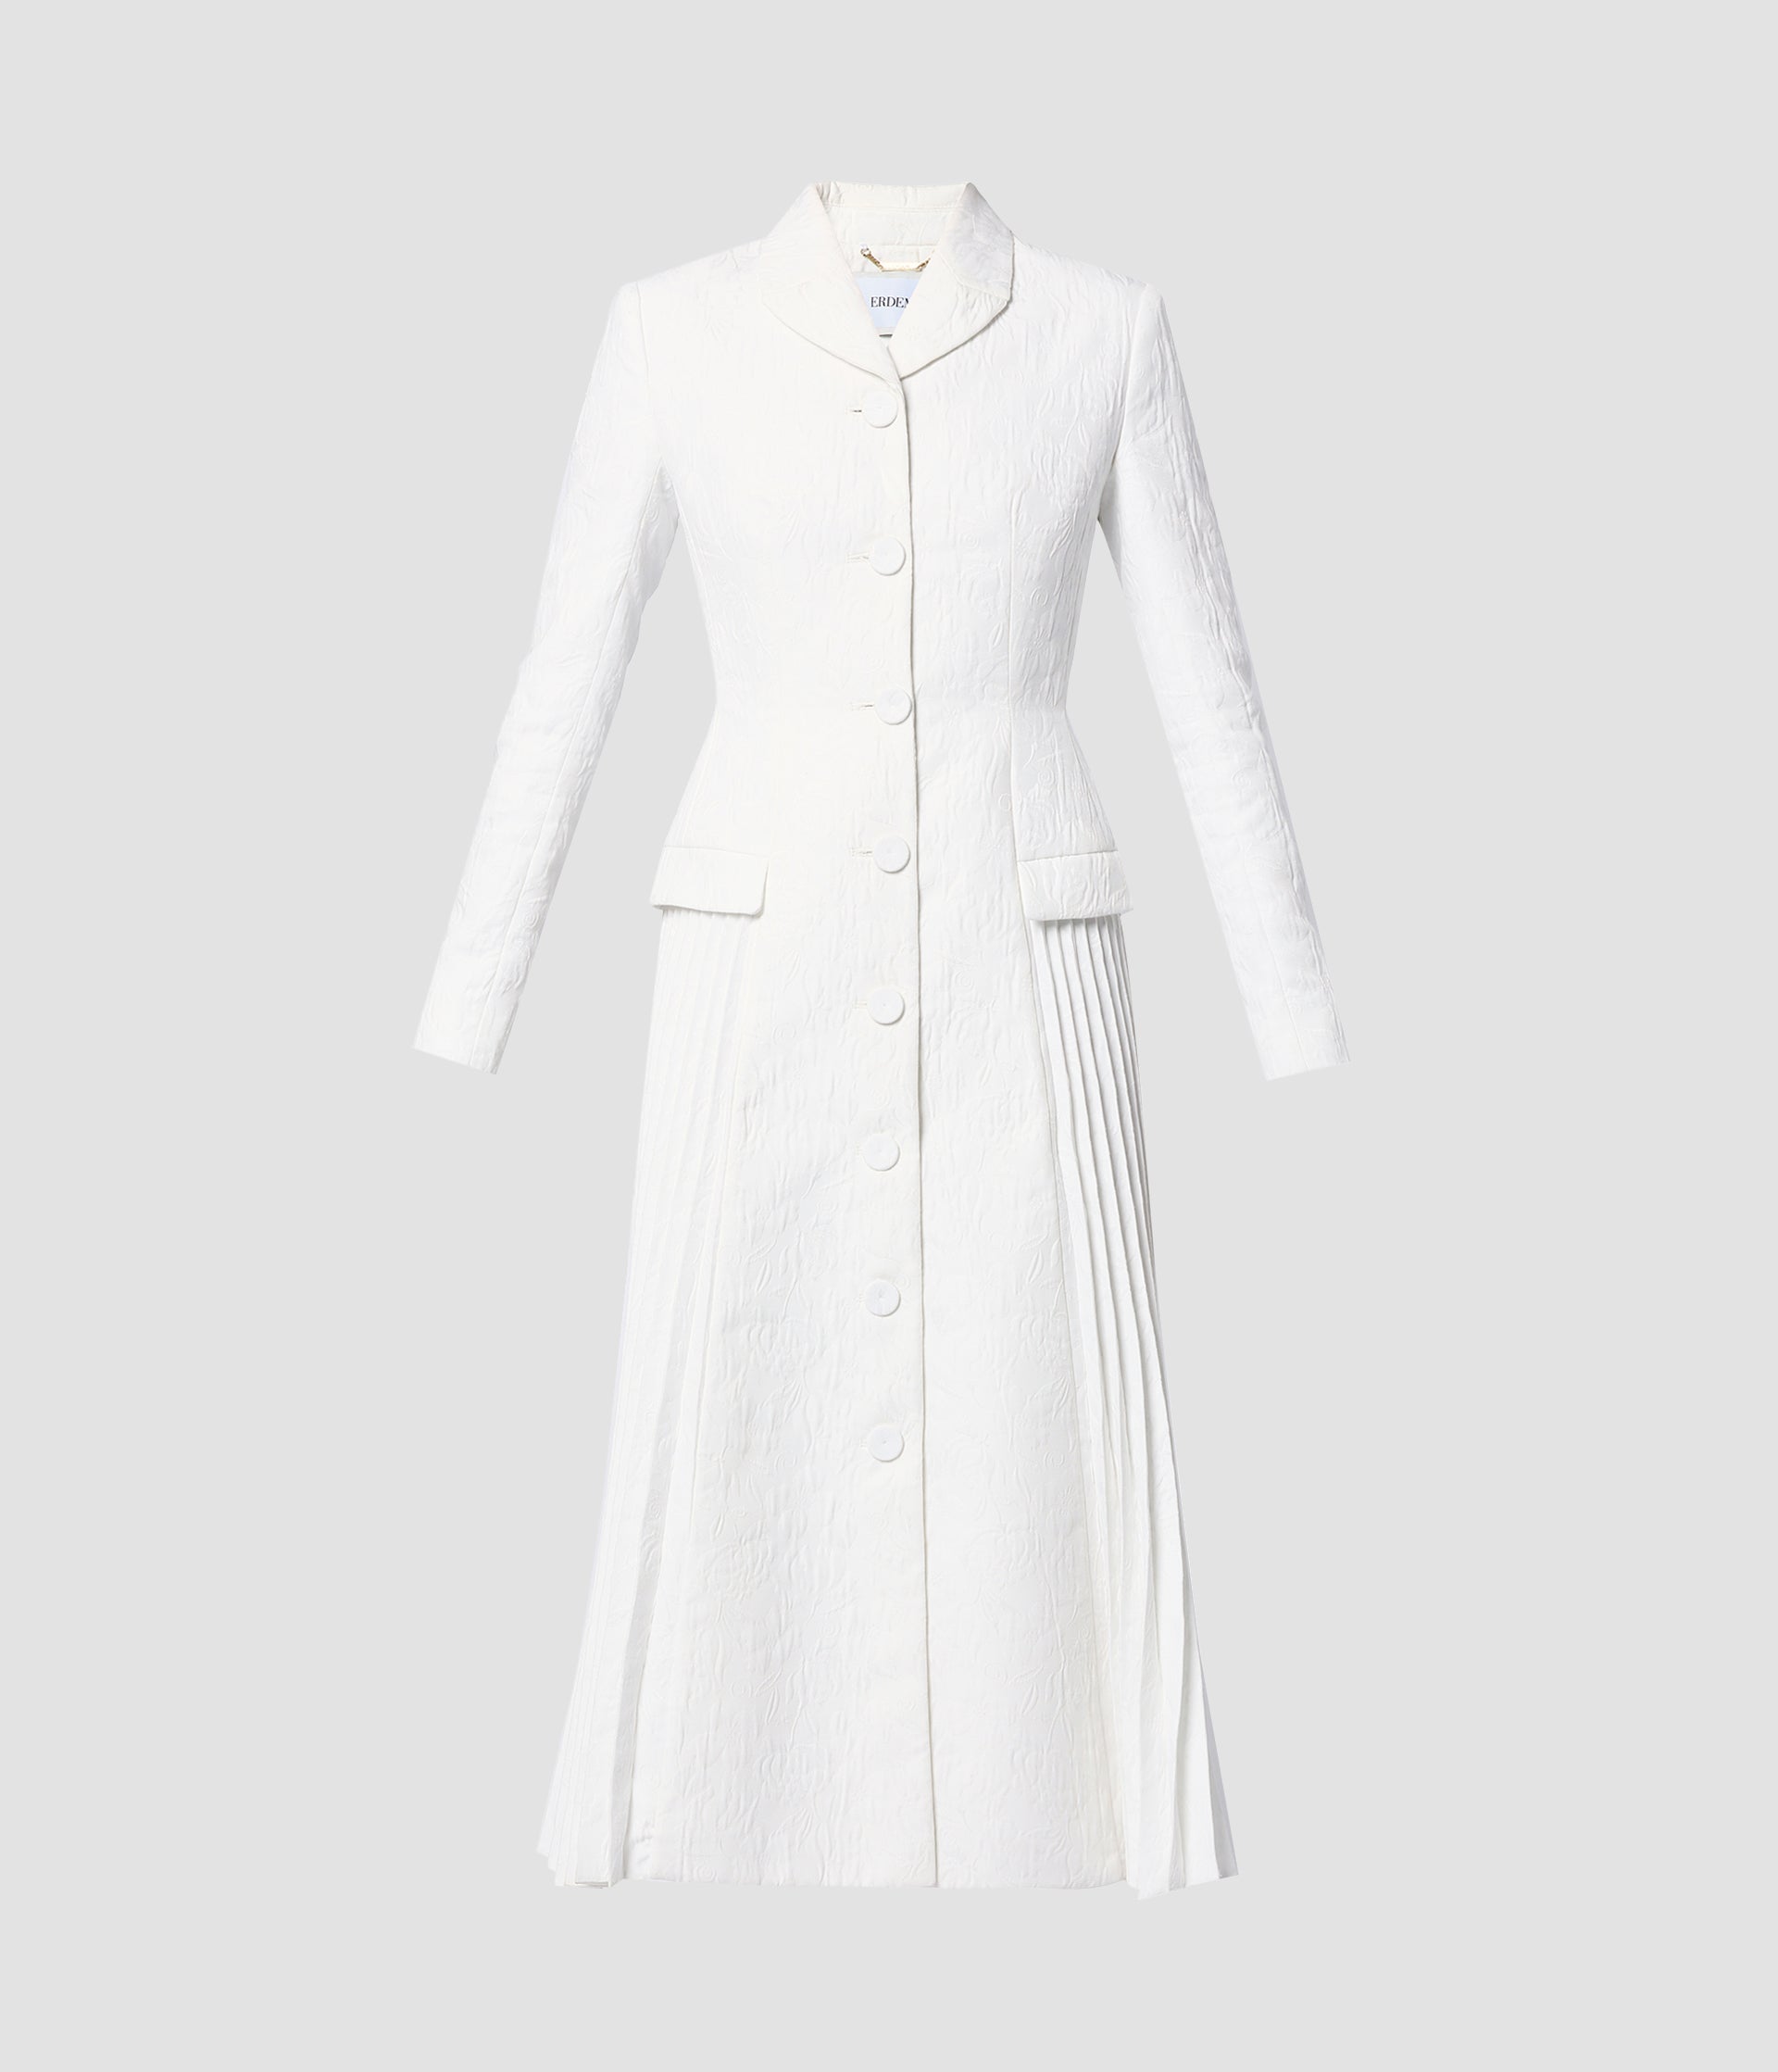 The Calla Coat by designer Erdem is the perfect addition to a bridal wardrobe. In heavy ivory cloque, this white wedding coat is a single breasted white bridal coat with a flattering pleated detail down at the side.